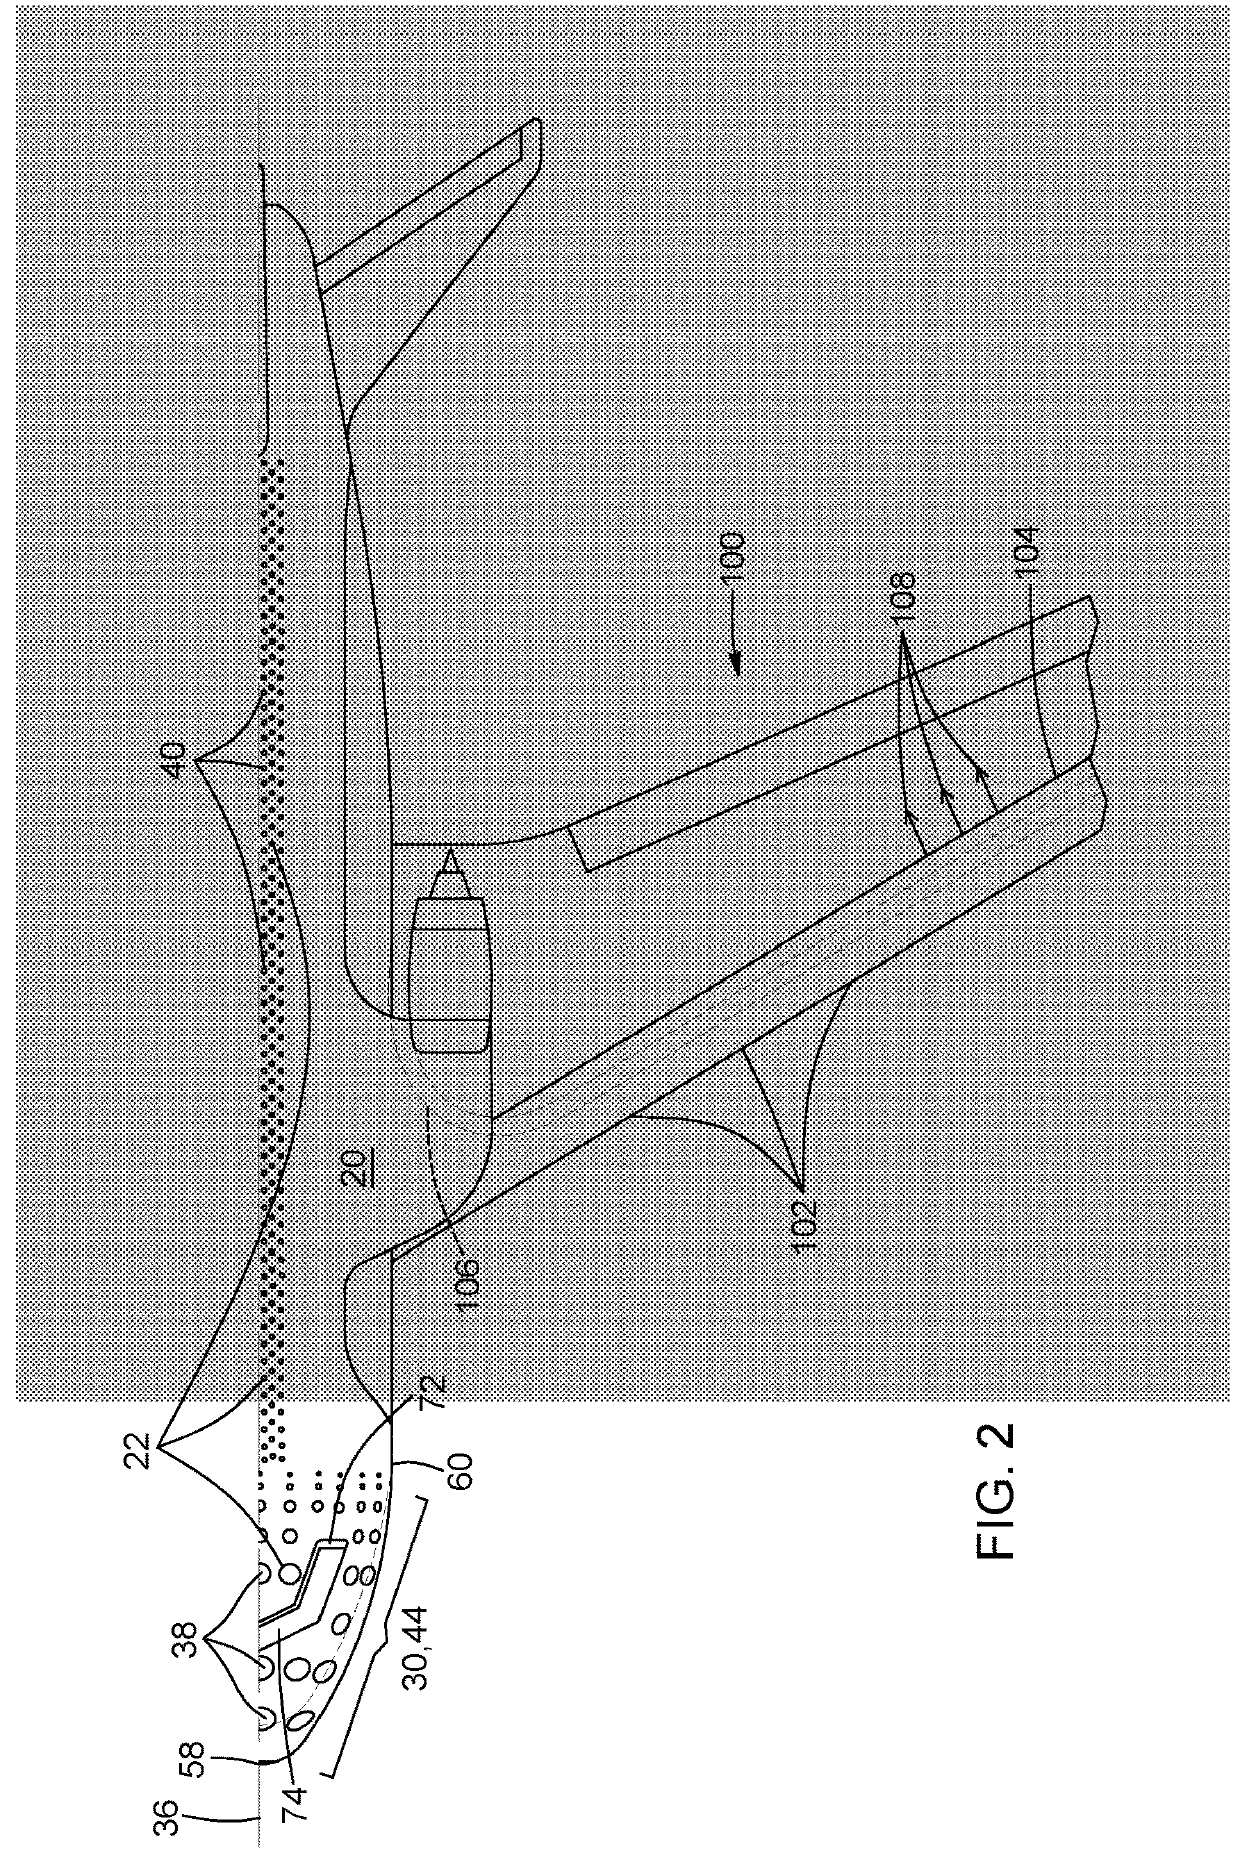 Air intake structure and airflow control system